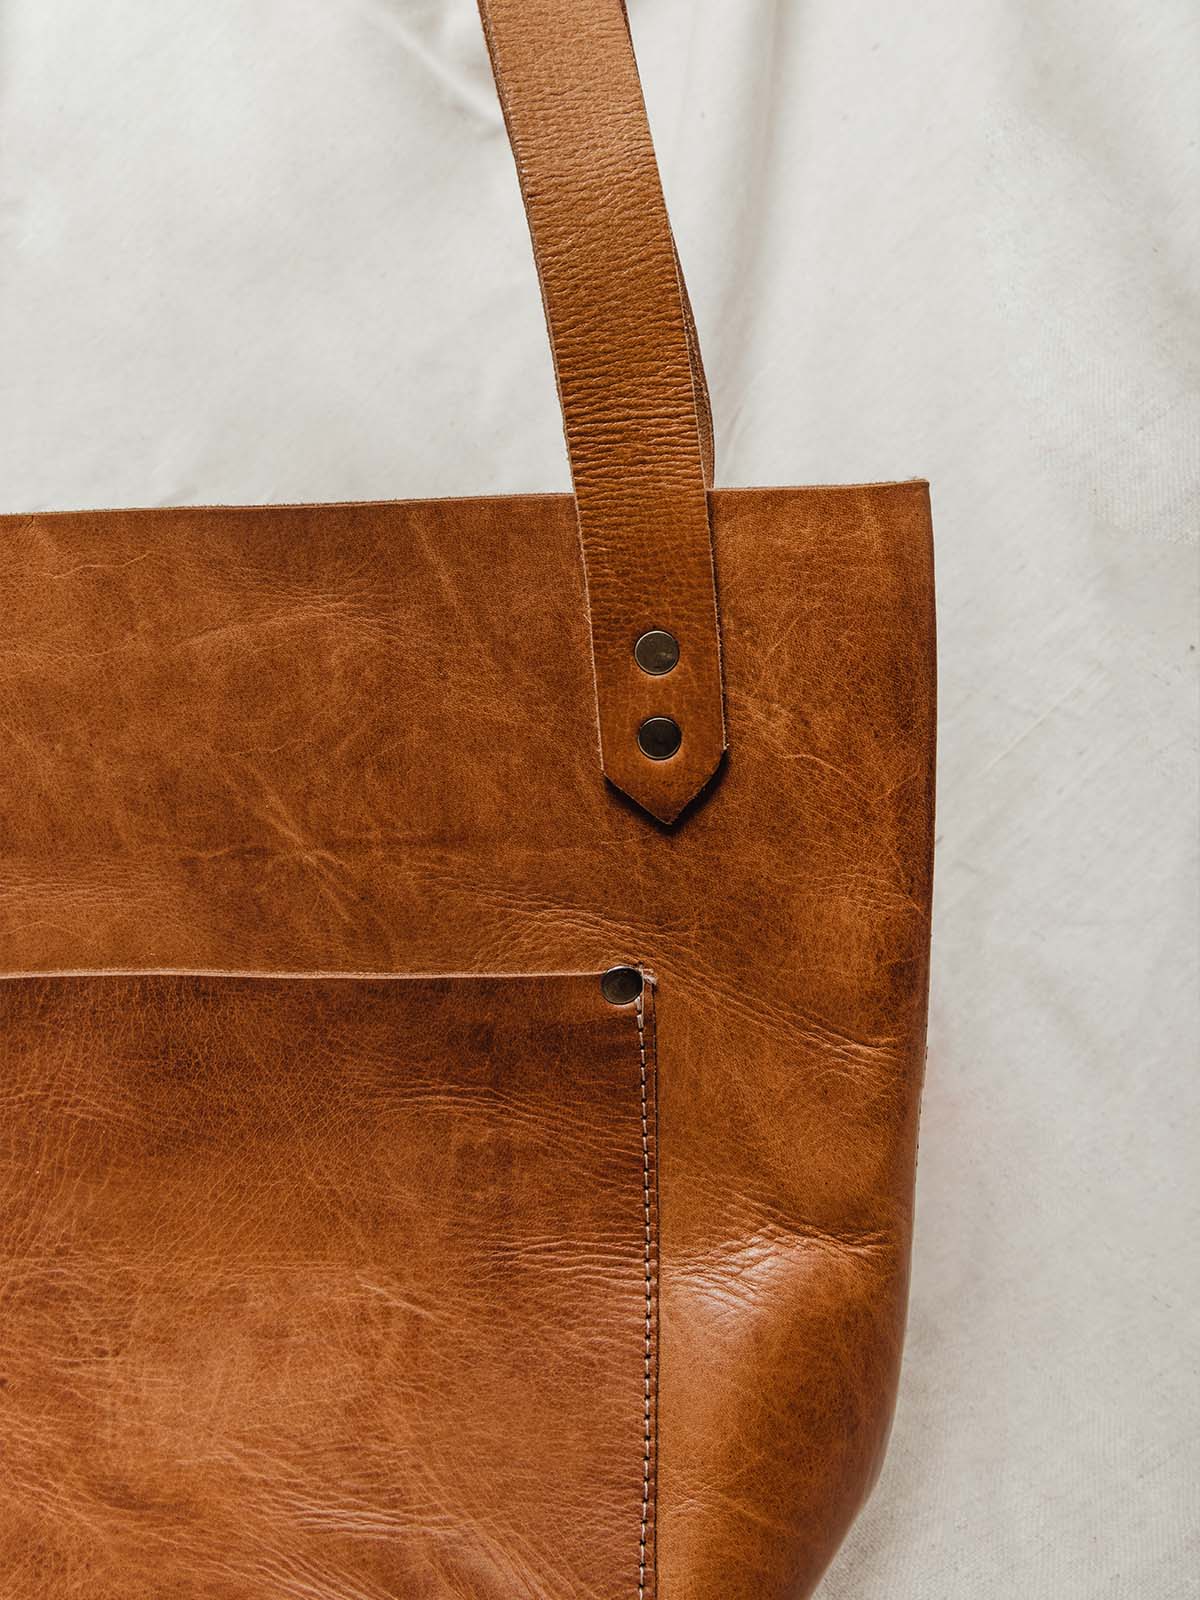 Detail of high quality hazelnut colored leather and front pocket.